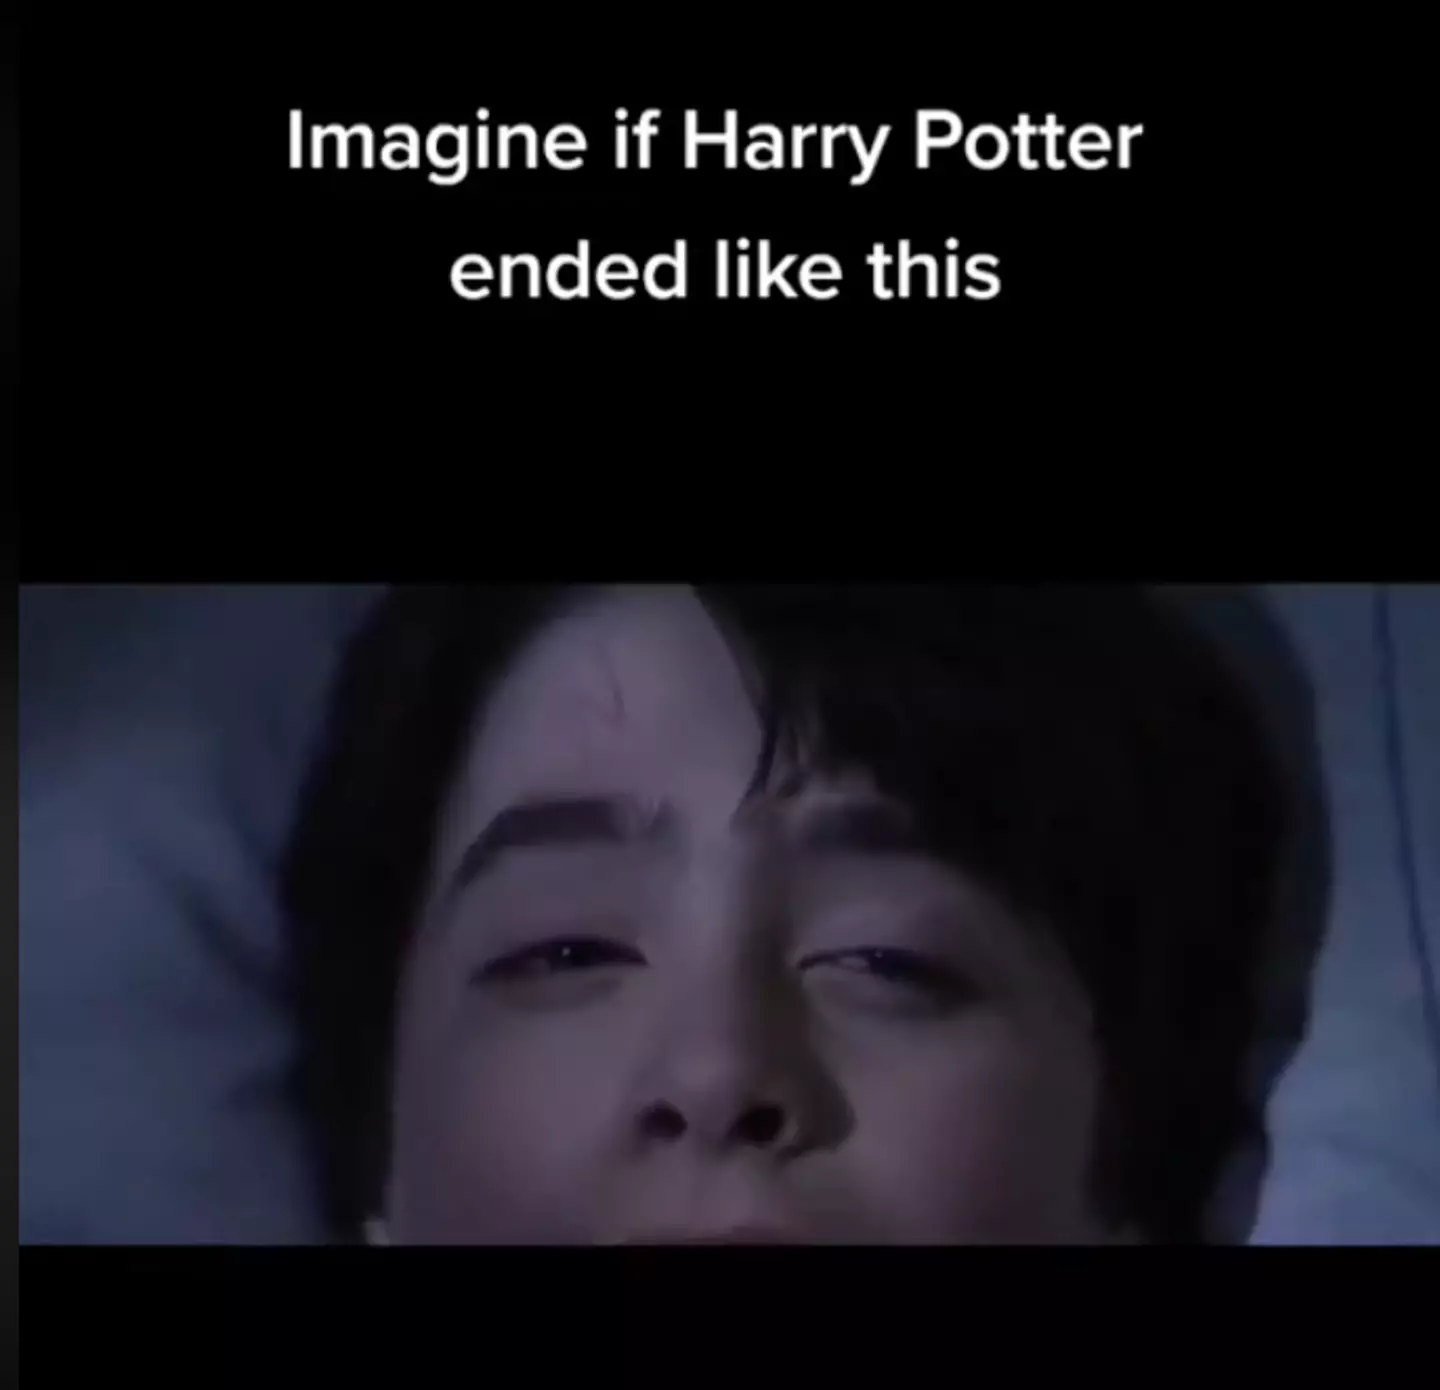 The clip then ends with Harry waking up in the cupboard under the stairs.